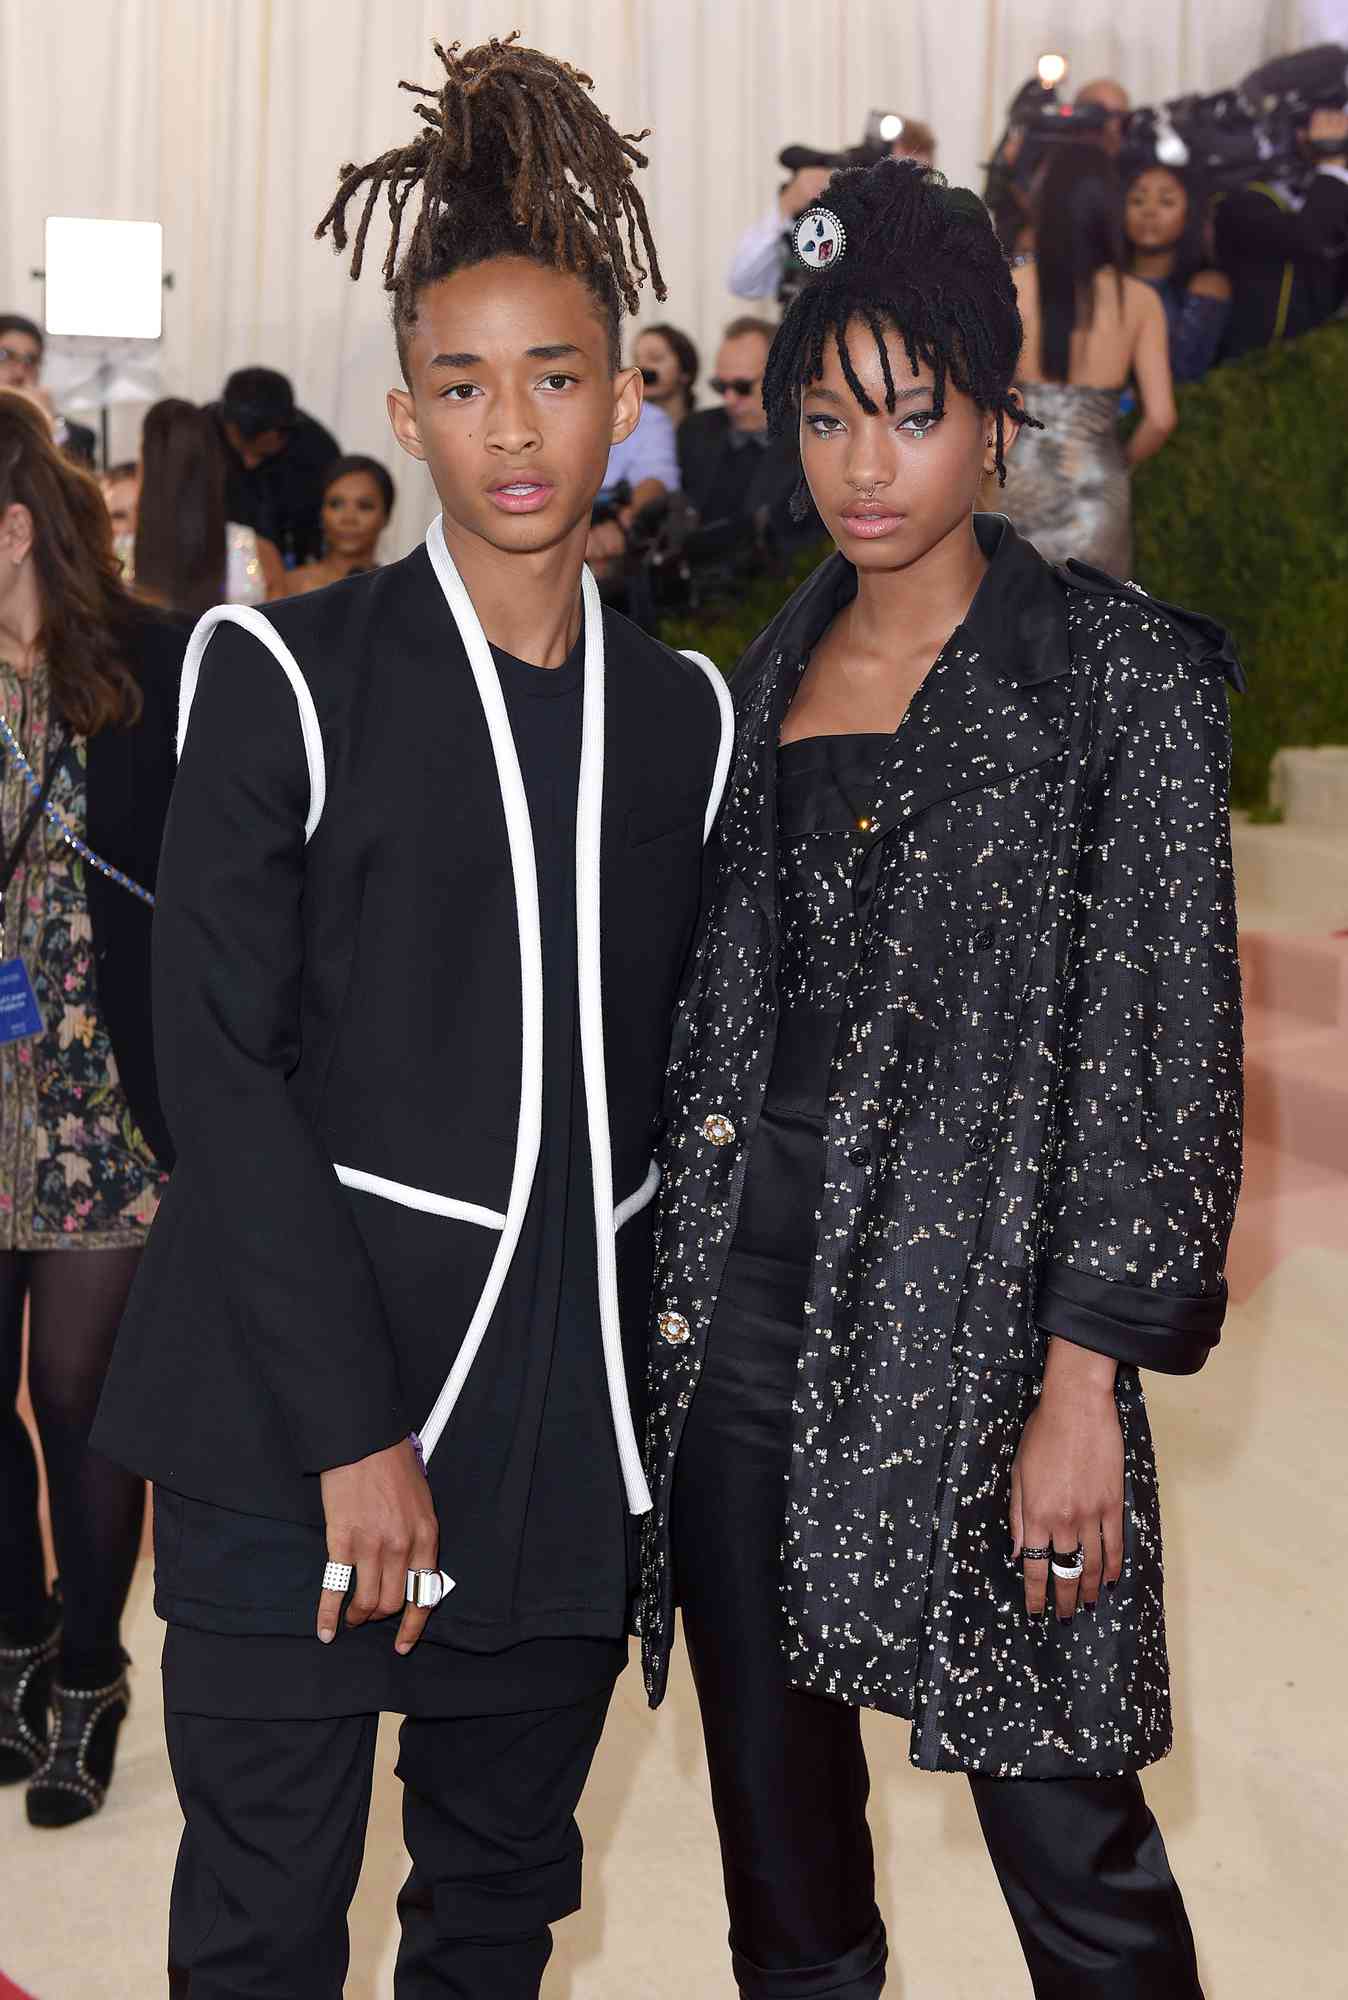 Jaden Smith and Willow Smith arrive for the "Manus x Machina: Fashion In An Age Of Technology" Costume Institute Gala at Metropolitan Museum of Art on May 2, 2016 in New York City